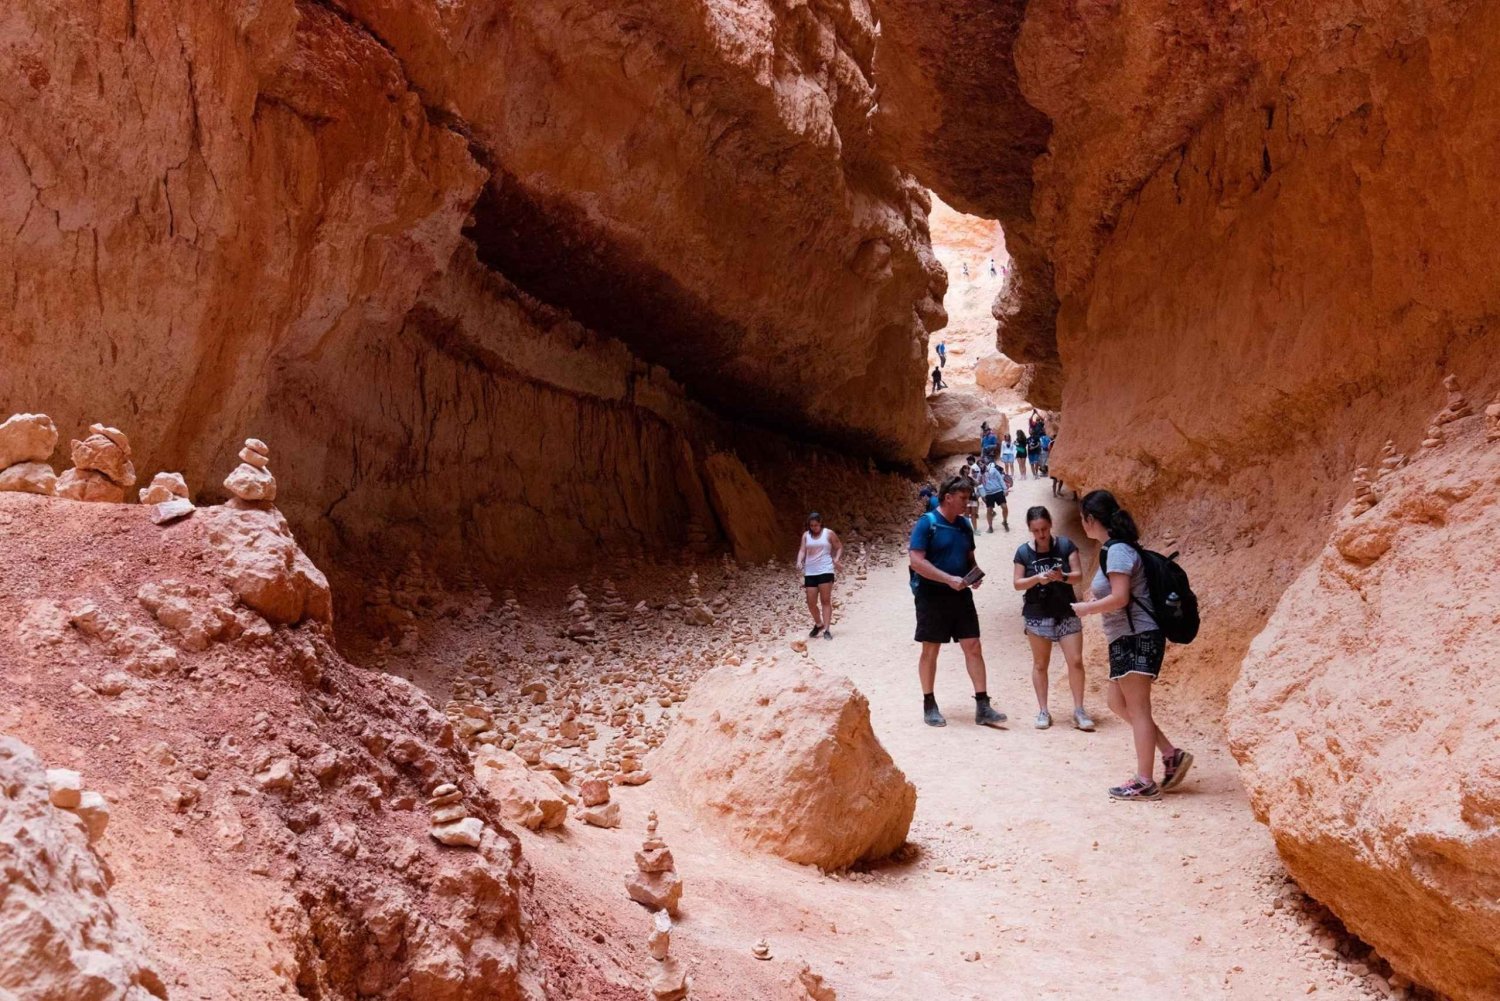 Bryce, Zion, and Grand Canyon 3-Day Tour